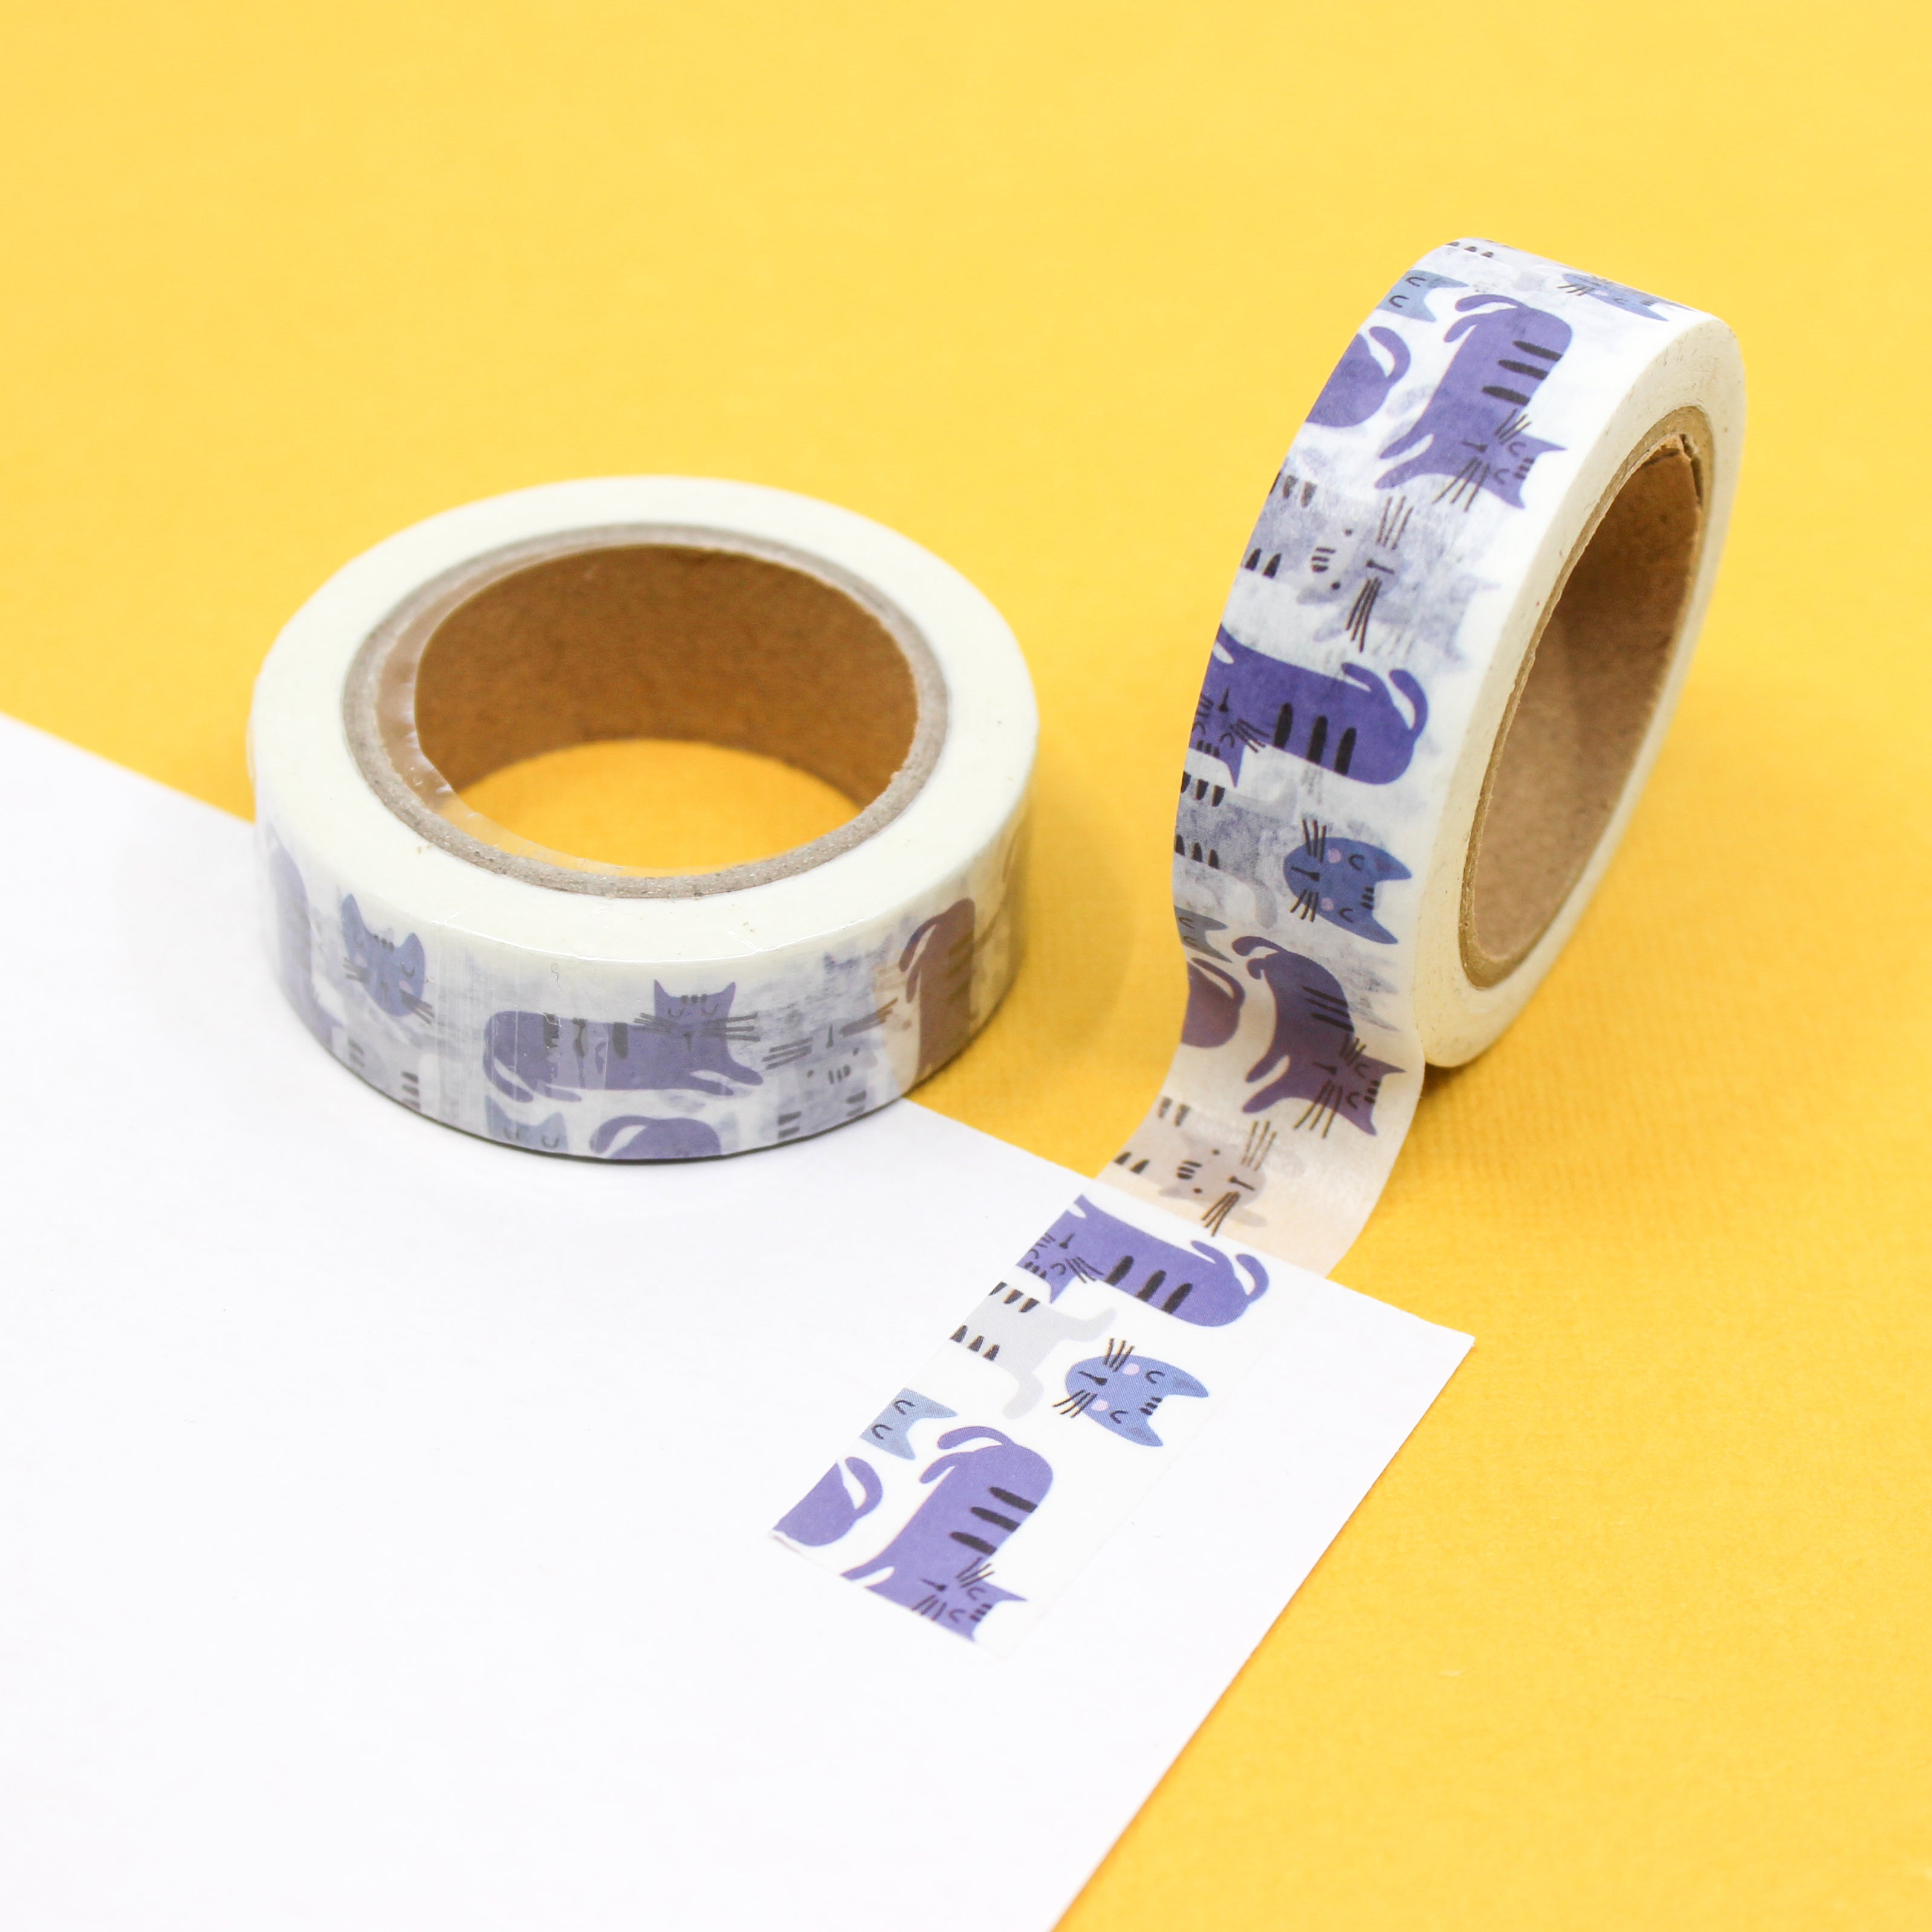 Infuse your crafts with cool feline vibes using our Cool Blue Cat Washi Tape, featuring a stylish cat design in calming shades of blue. Perfect for adding a touch of sophistication to your projects. This tape is sold at BBB Supplies Craft Shop.